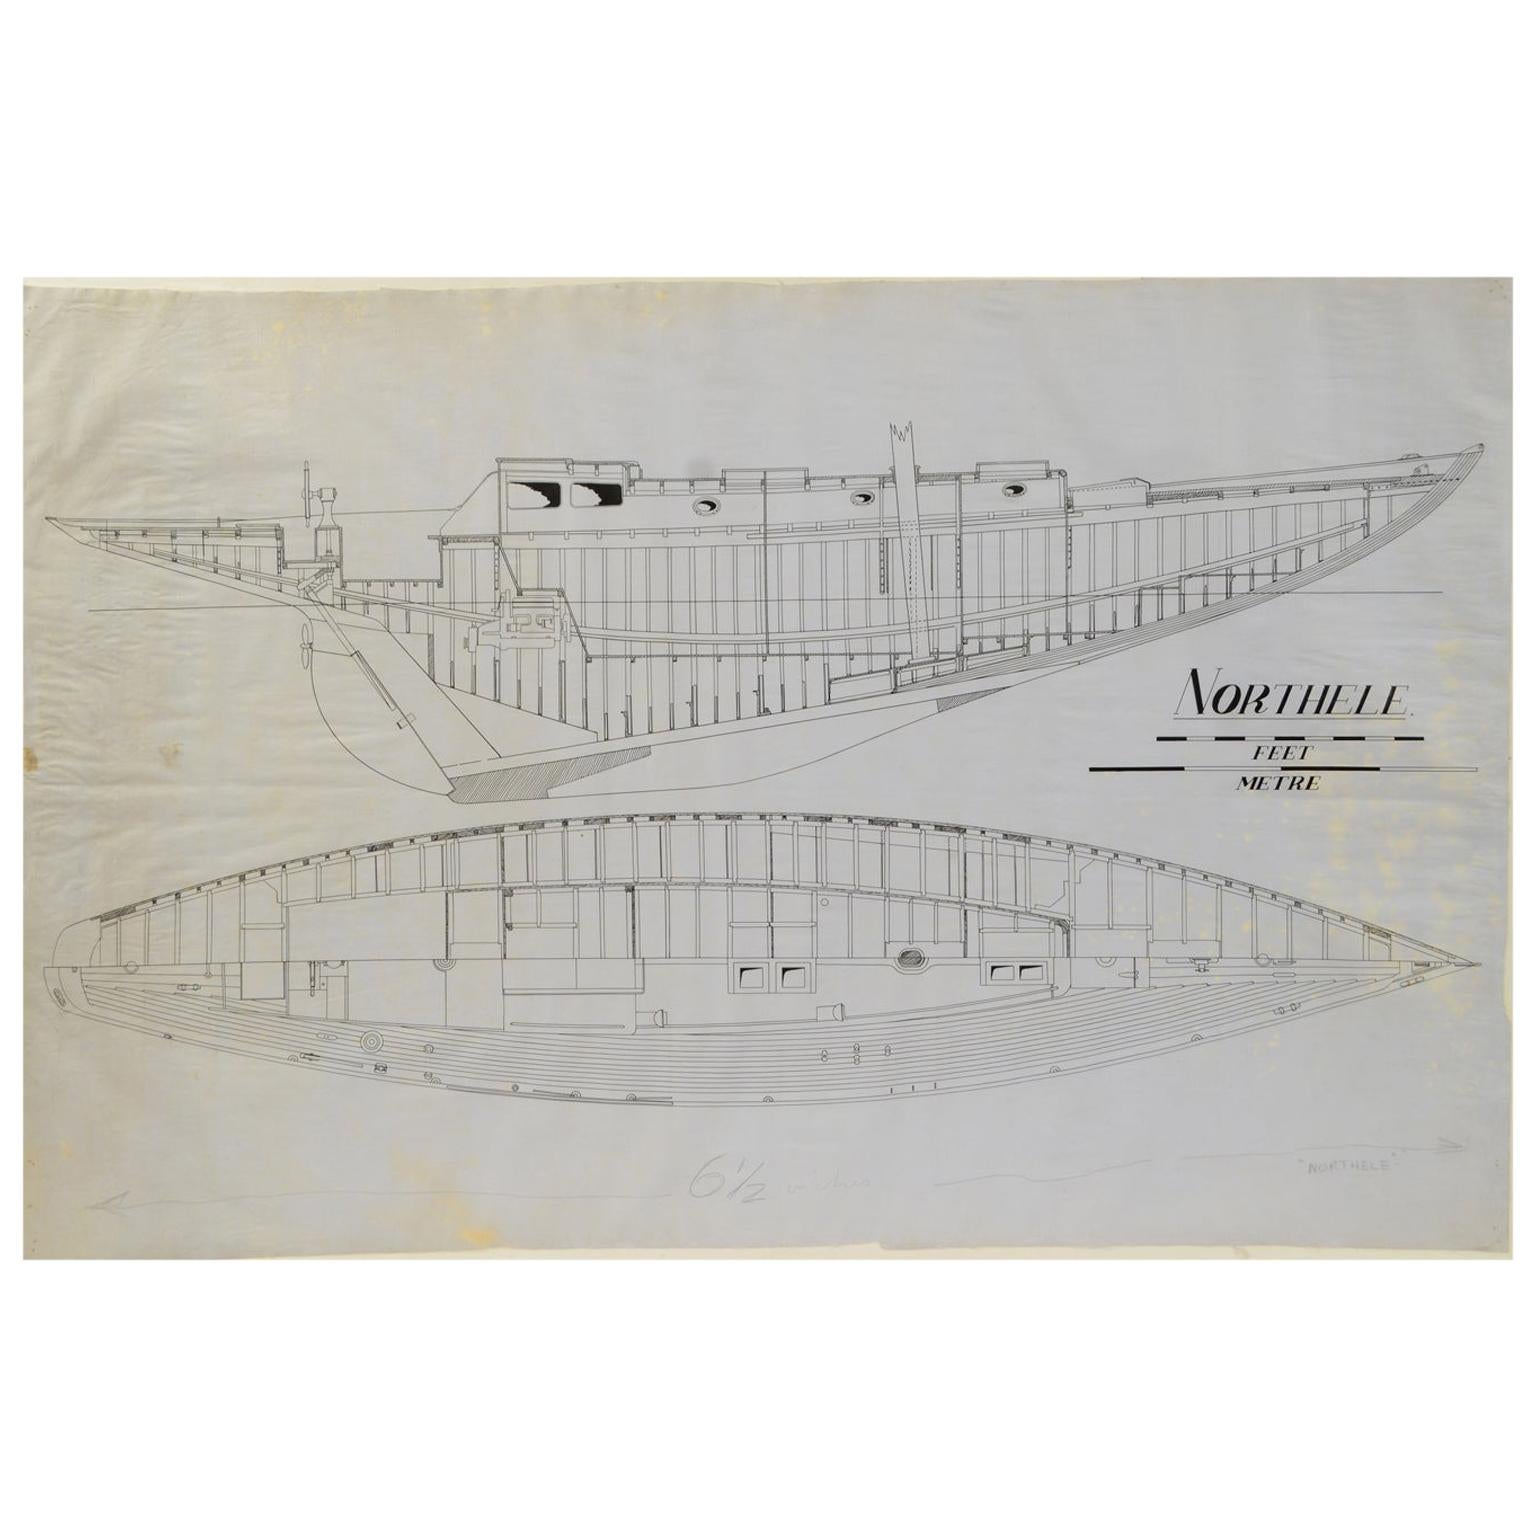 1949 Nautical Project of the Northele Sailing Boat by Berthon Uffa Fox archives For Sale